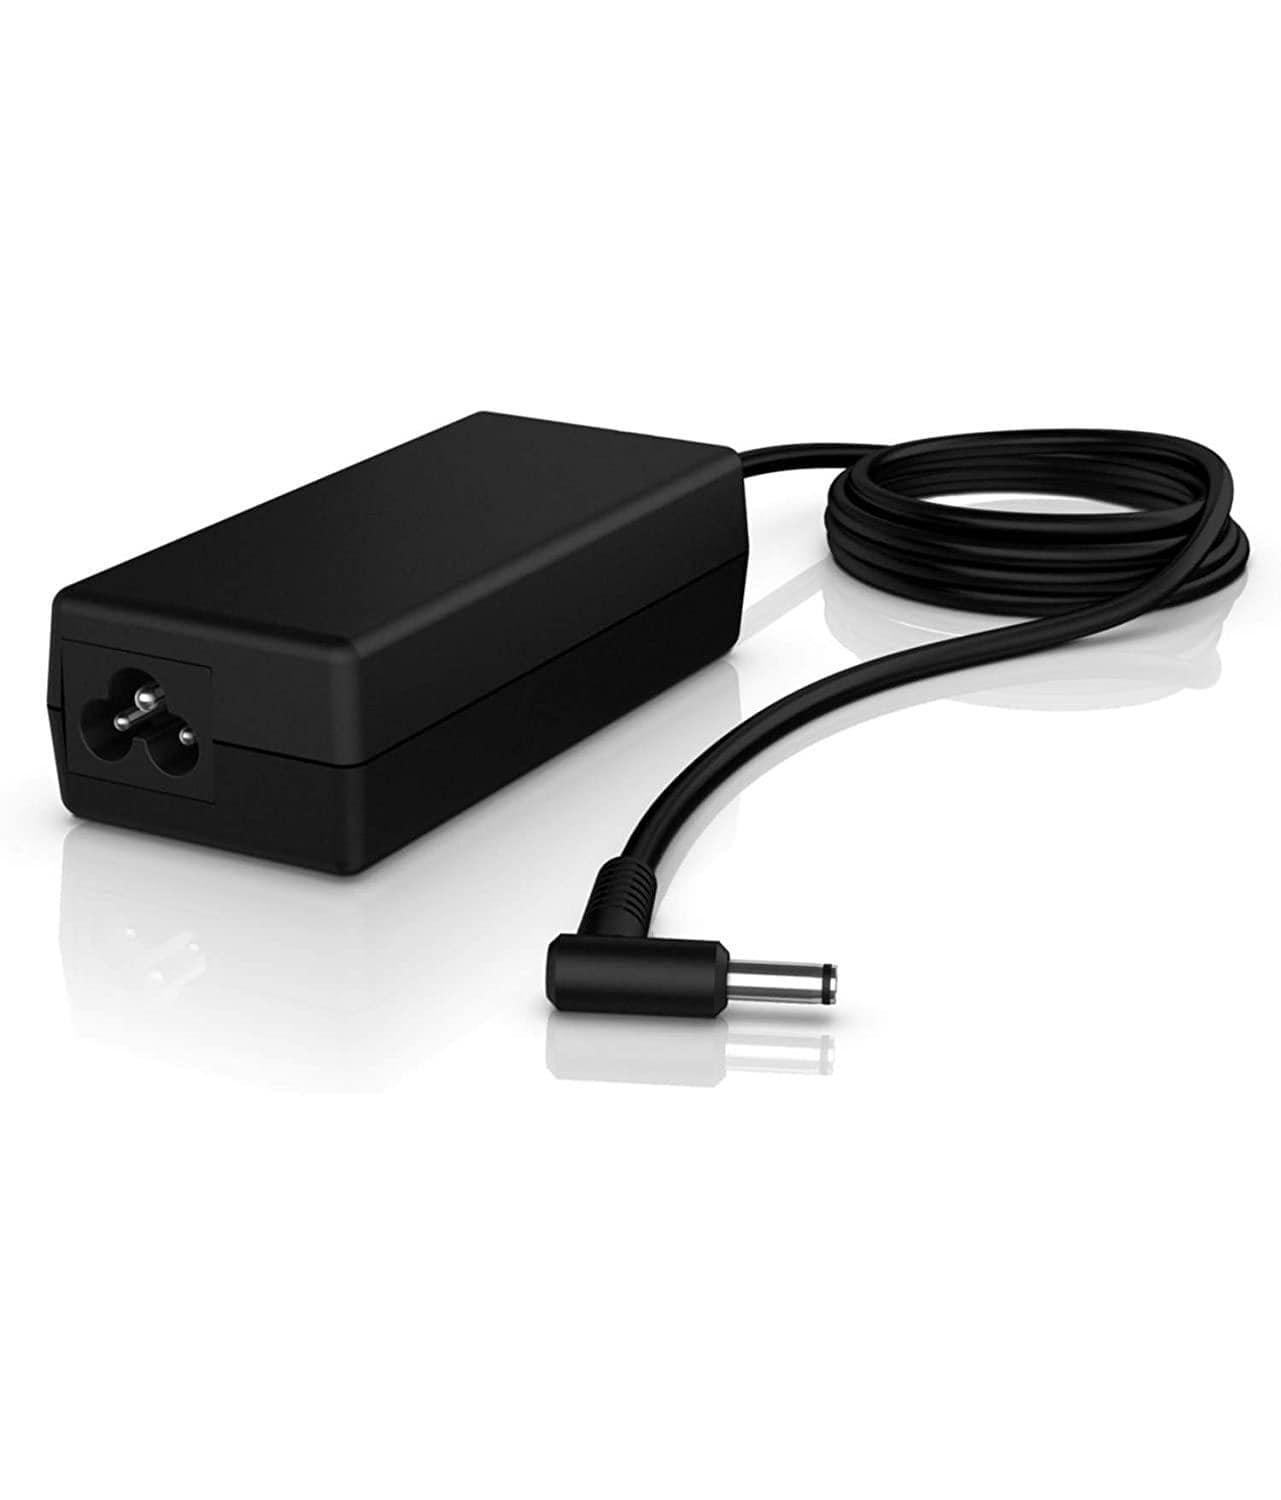 Dealsplant 65W 4.5mm AC Adapter Compatible for HP laptop-Laptops & Computer Peripherals-dealsplant